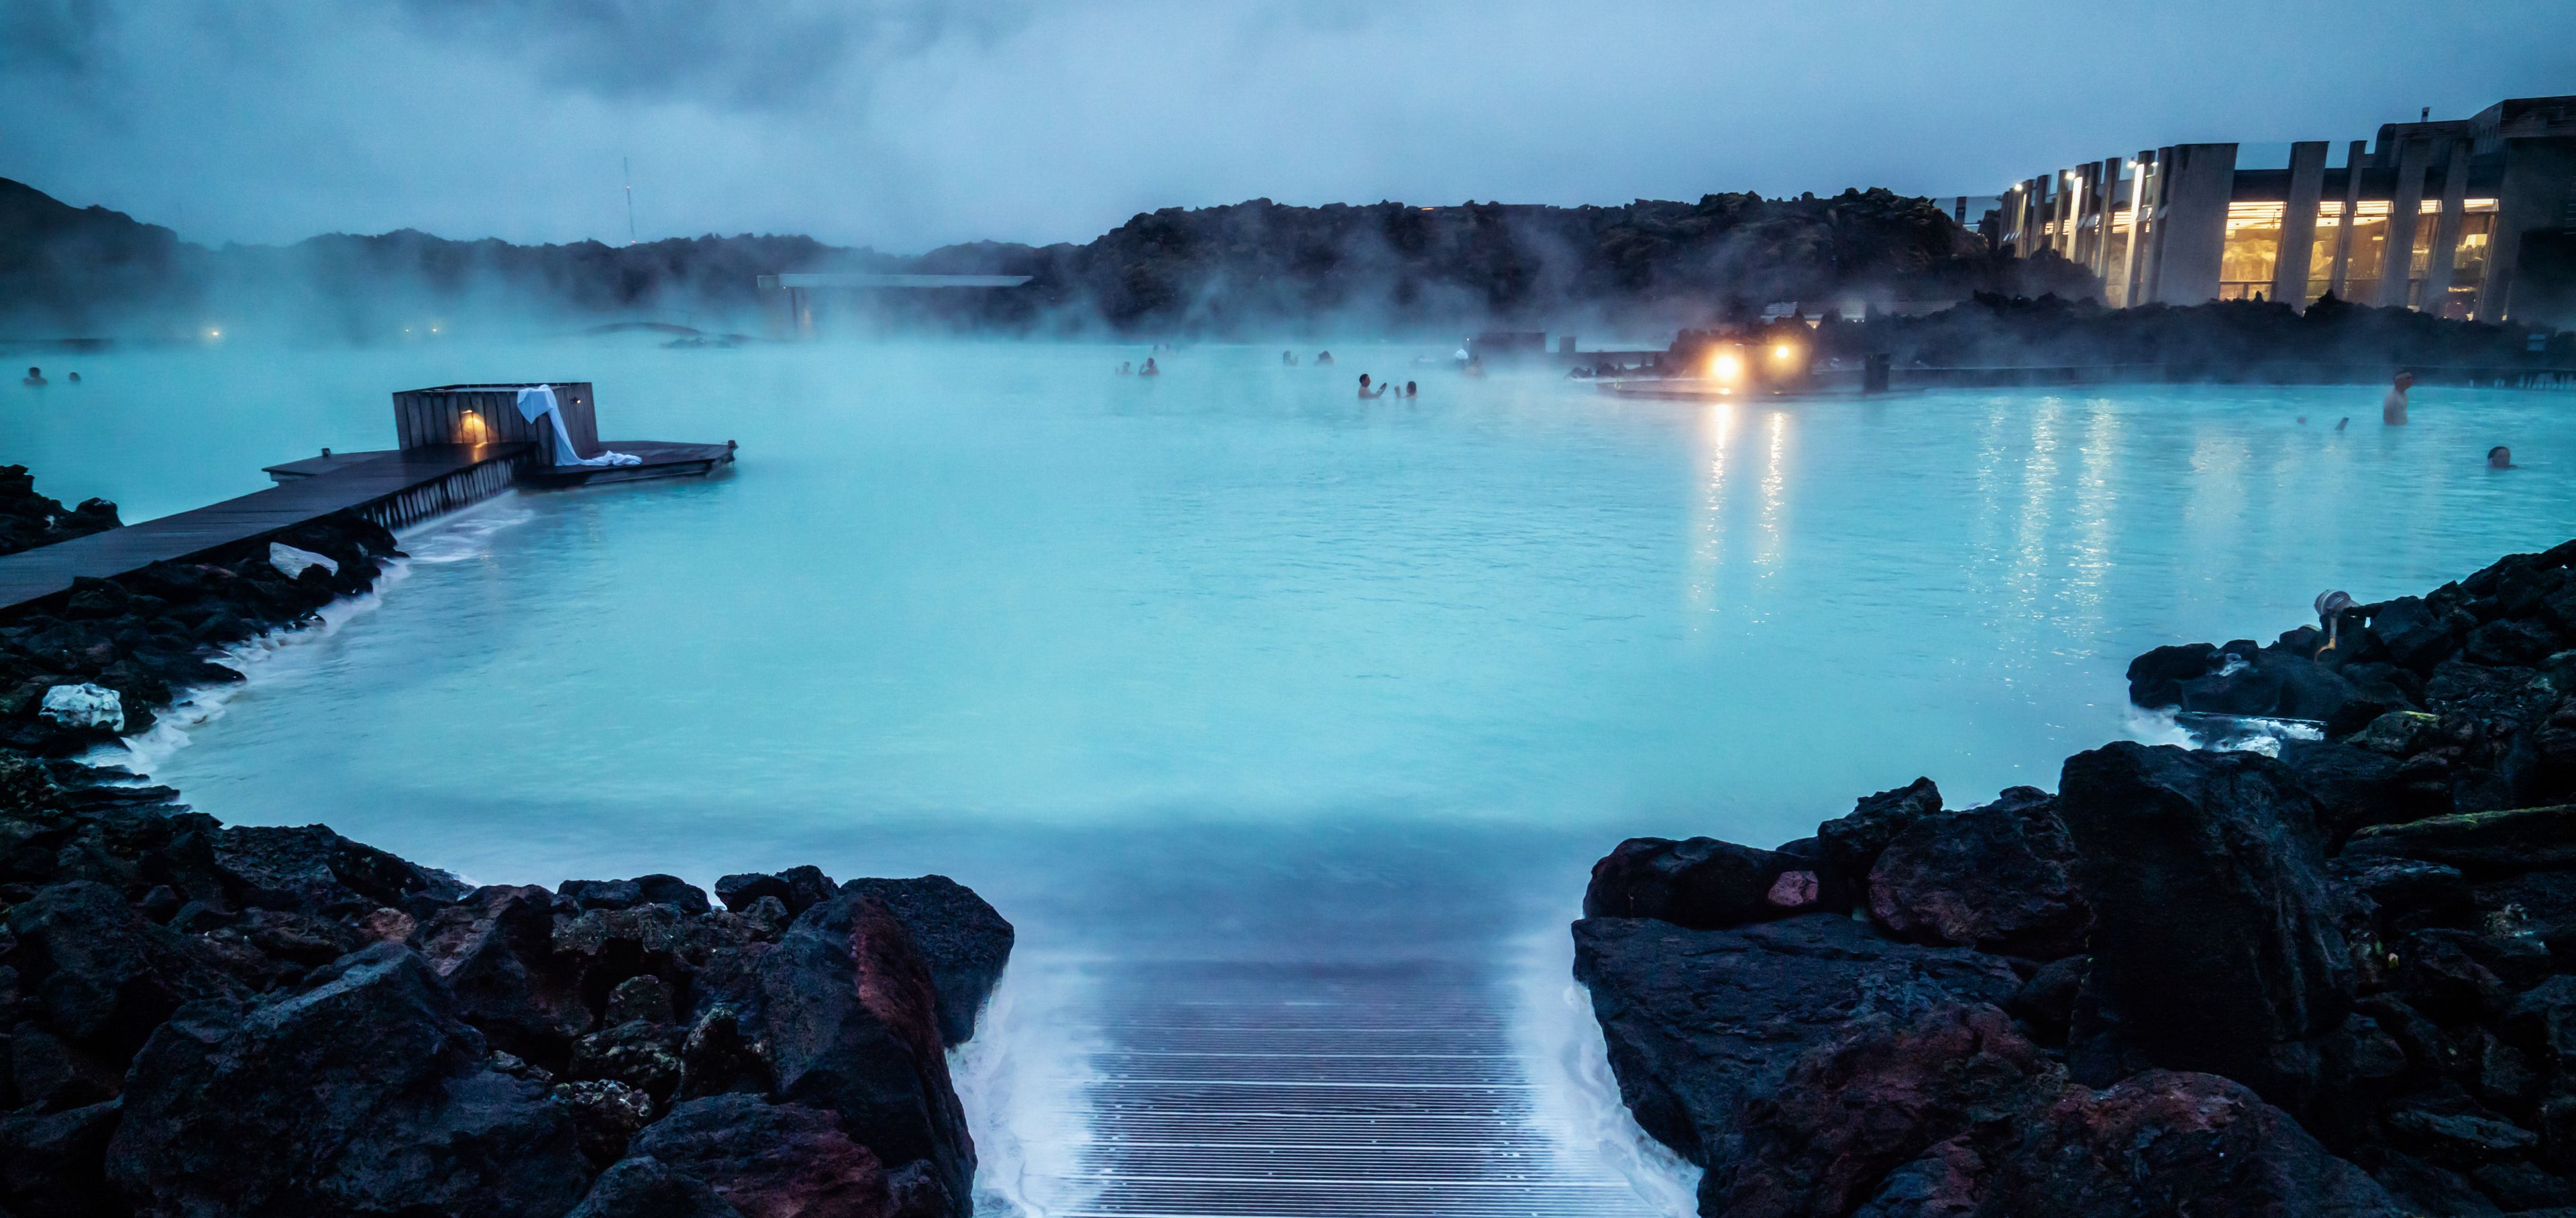 Aerial view of the Blue Lagoon in Iceland with people swimming in the warm waters